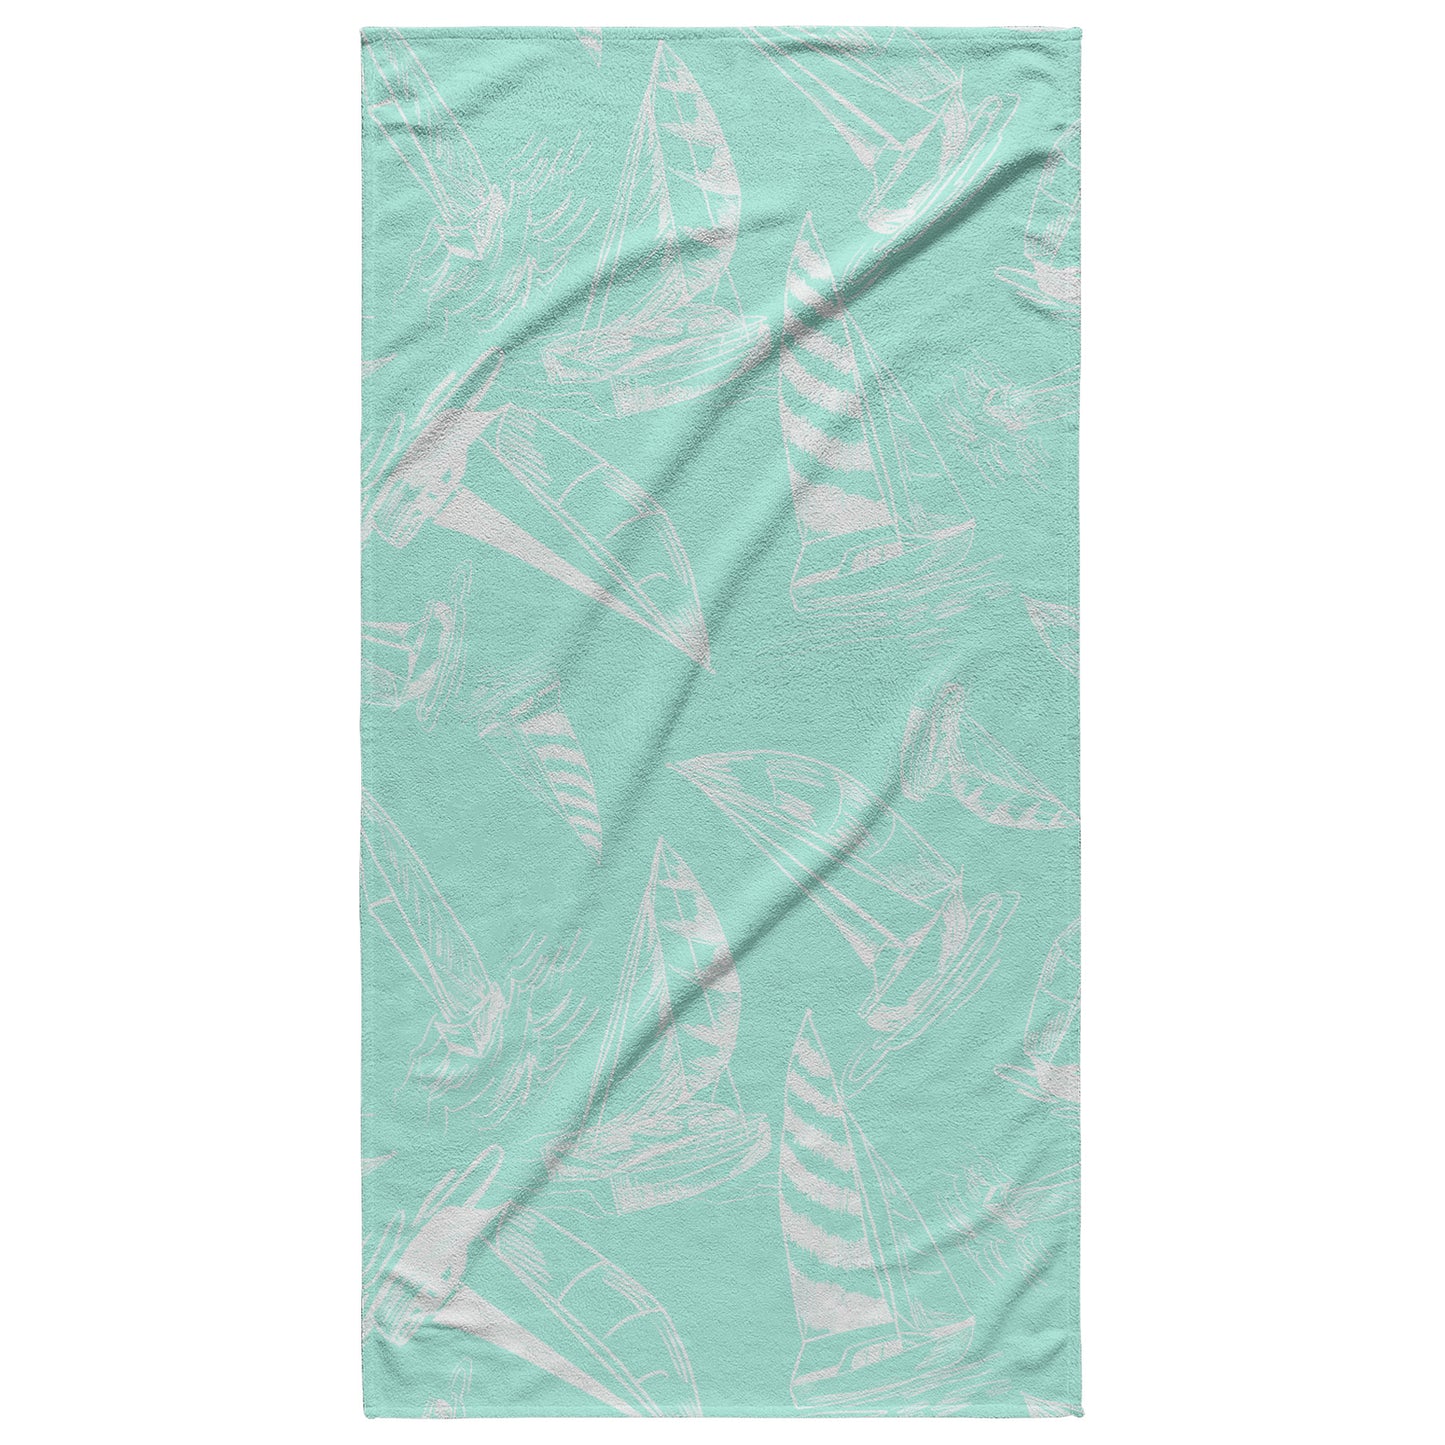 Sailboat Sketches on Mint Background, Beach Towel